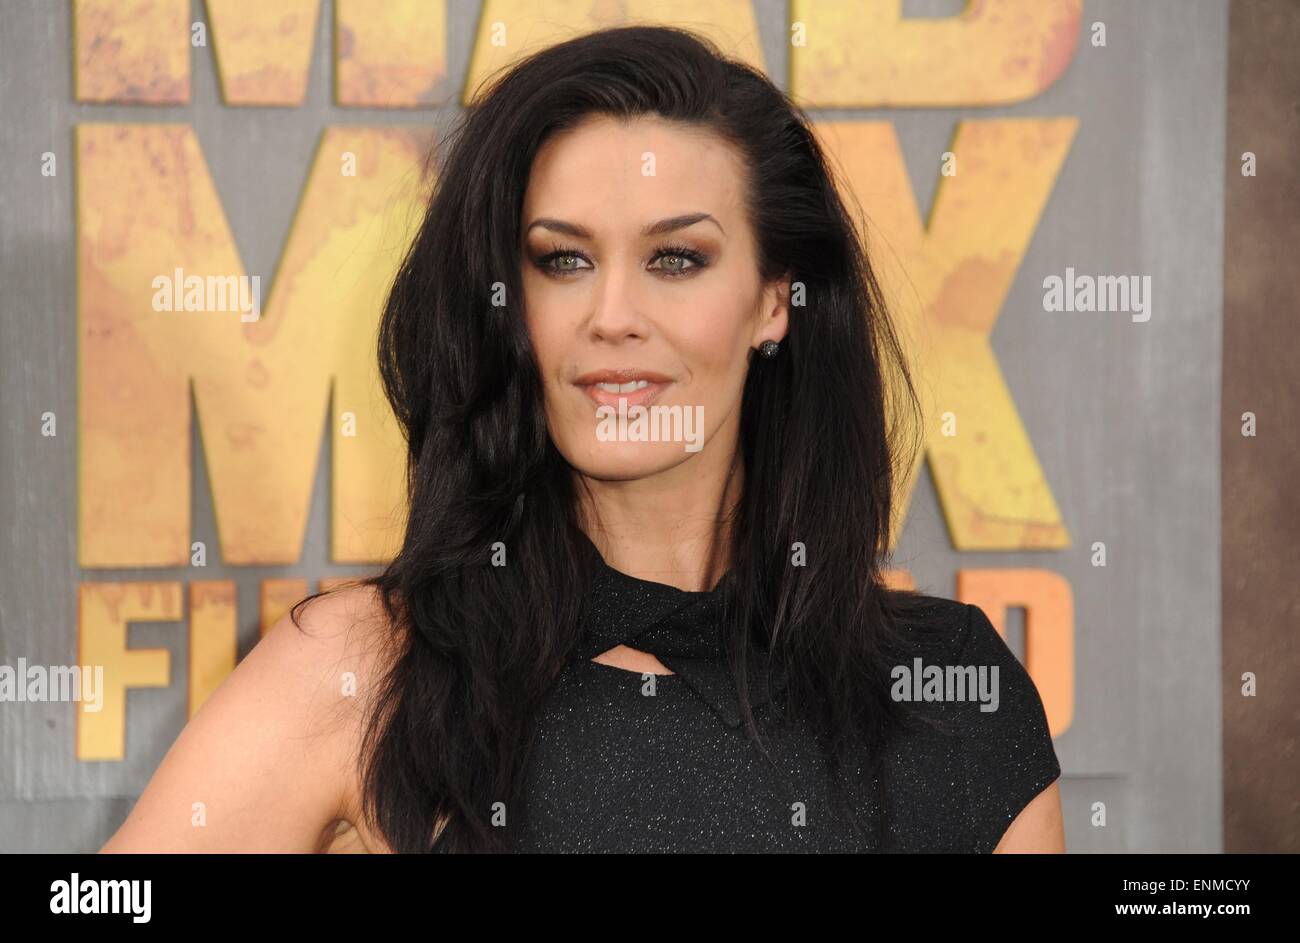 Los Angeles, California, USA. 7th May, 2015. Megan Gale at arrivals for MAD MAX: FURY ROAD Premiere, TCL Chinese 6 Theatres (formerly Grauman's), Los Angeles, CA May 7, 2015. Credit:  Everett Collection Inc/Alamy Live News Stock Photo